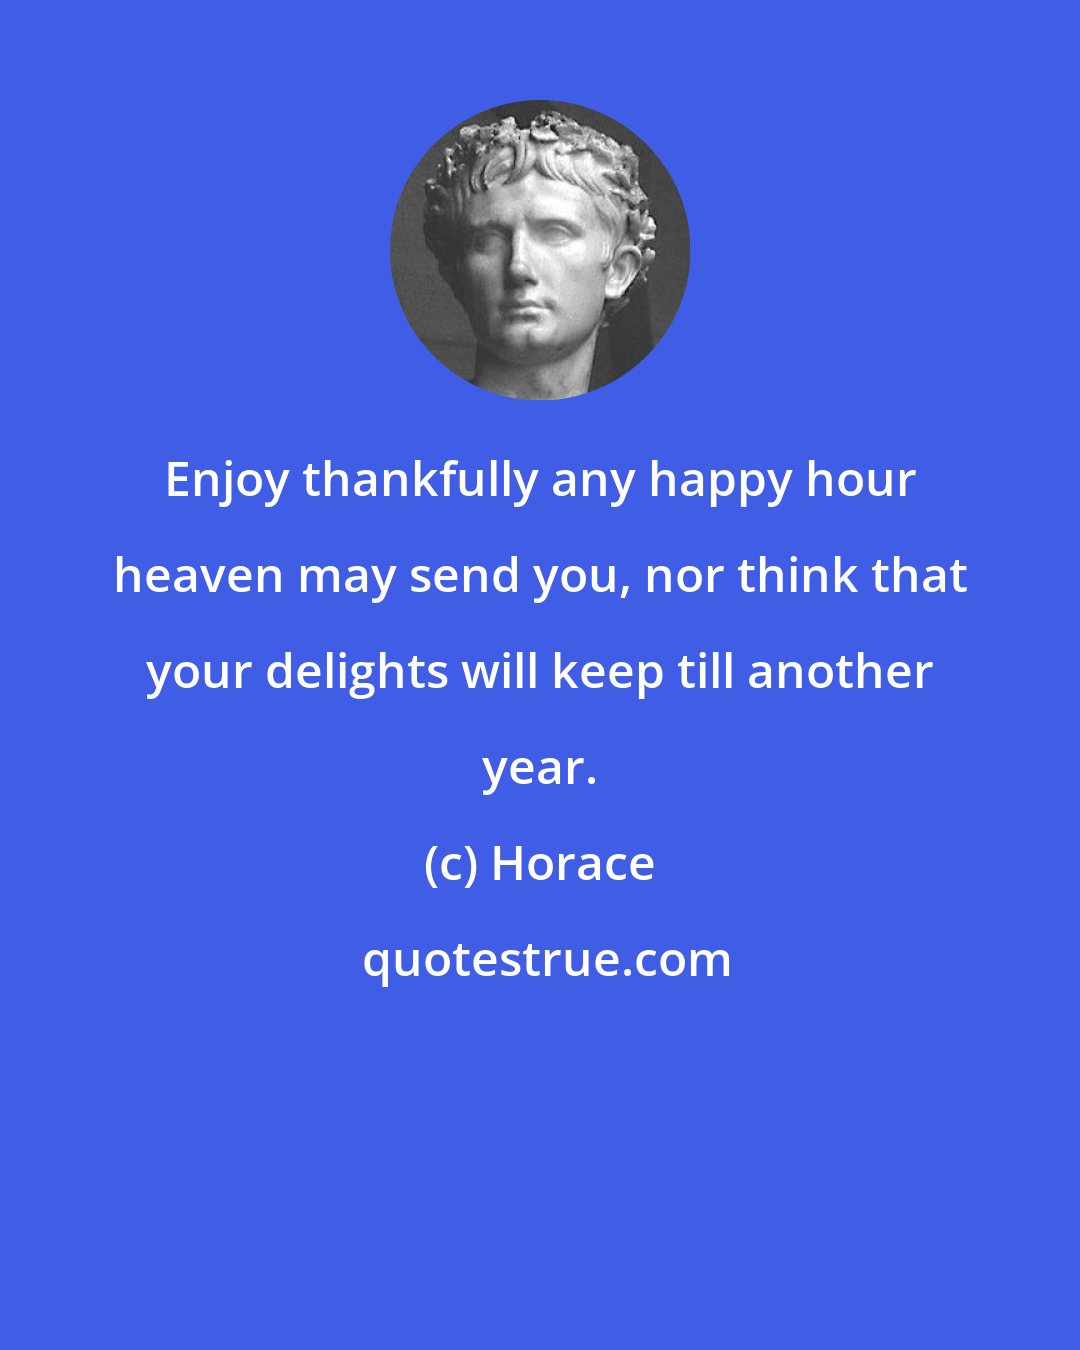 Horace: Enjoy thankfully any happy hour heaven may send you, nor think that your delights will keep till another year.